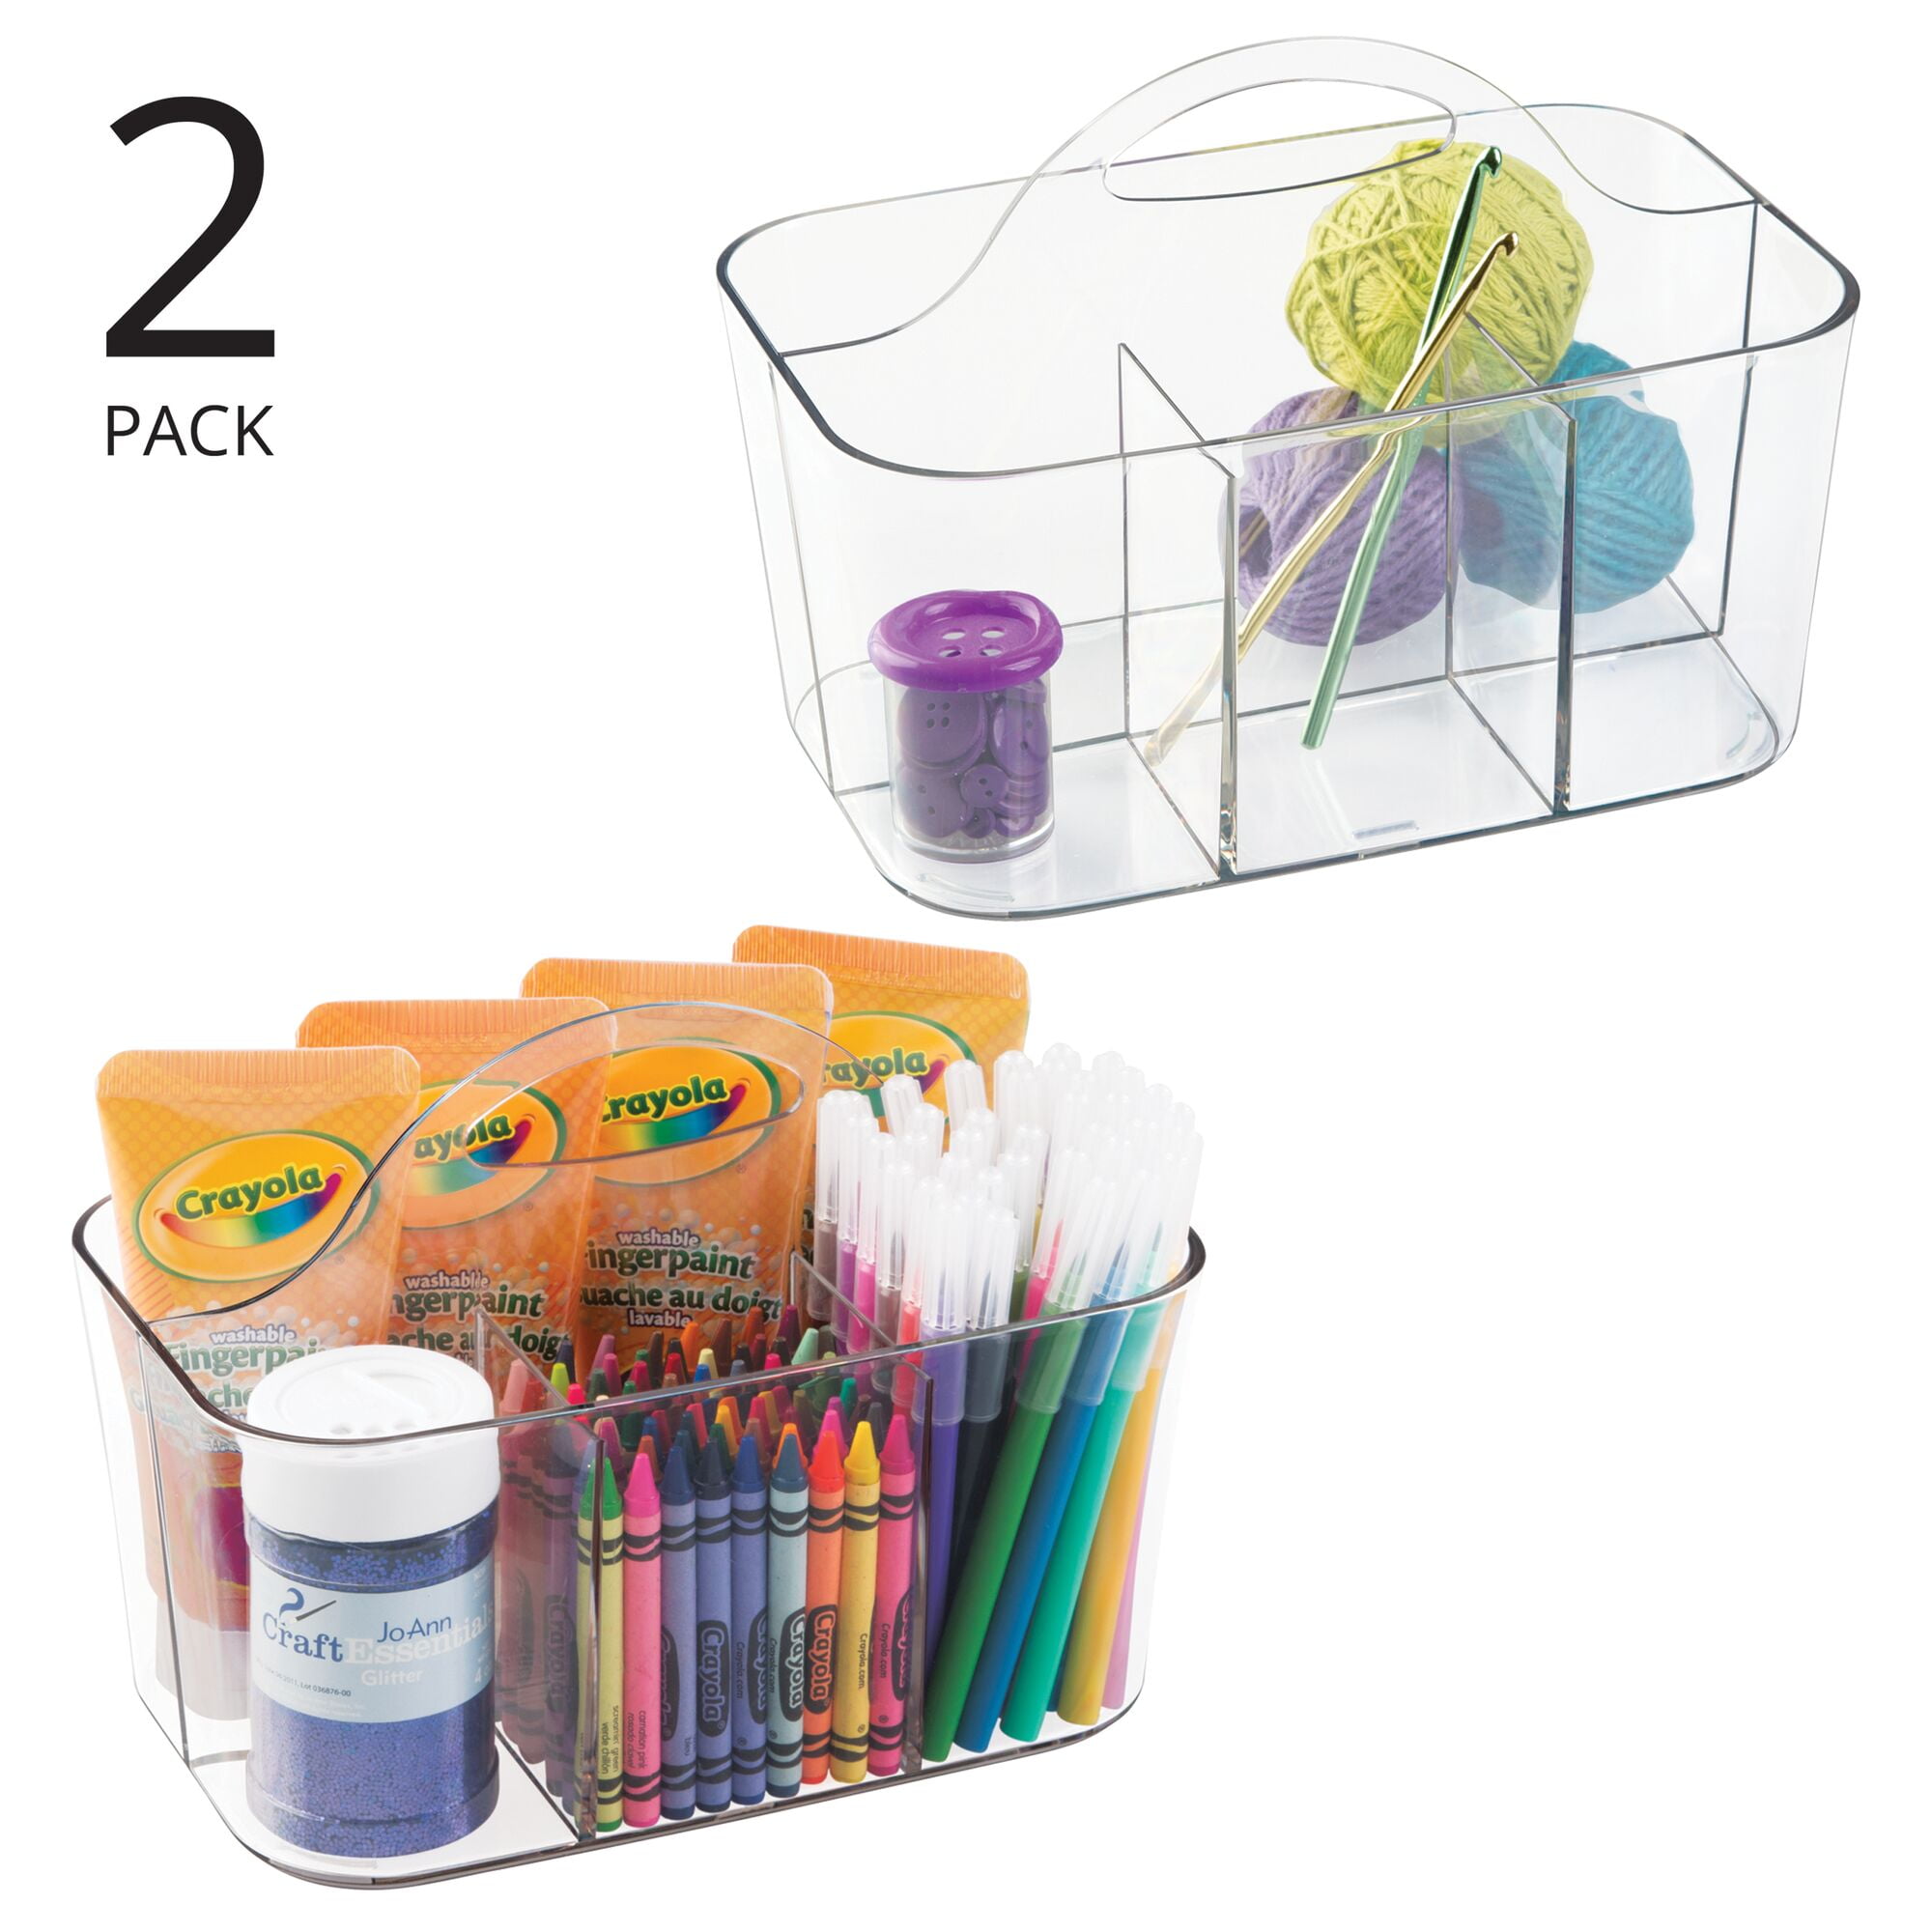 mDesign Plastic Portable Craft Storage Organizer Bin with Handle - Clear, 1  - Fry's Food Stores